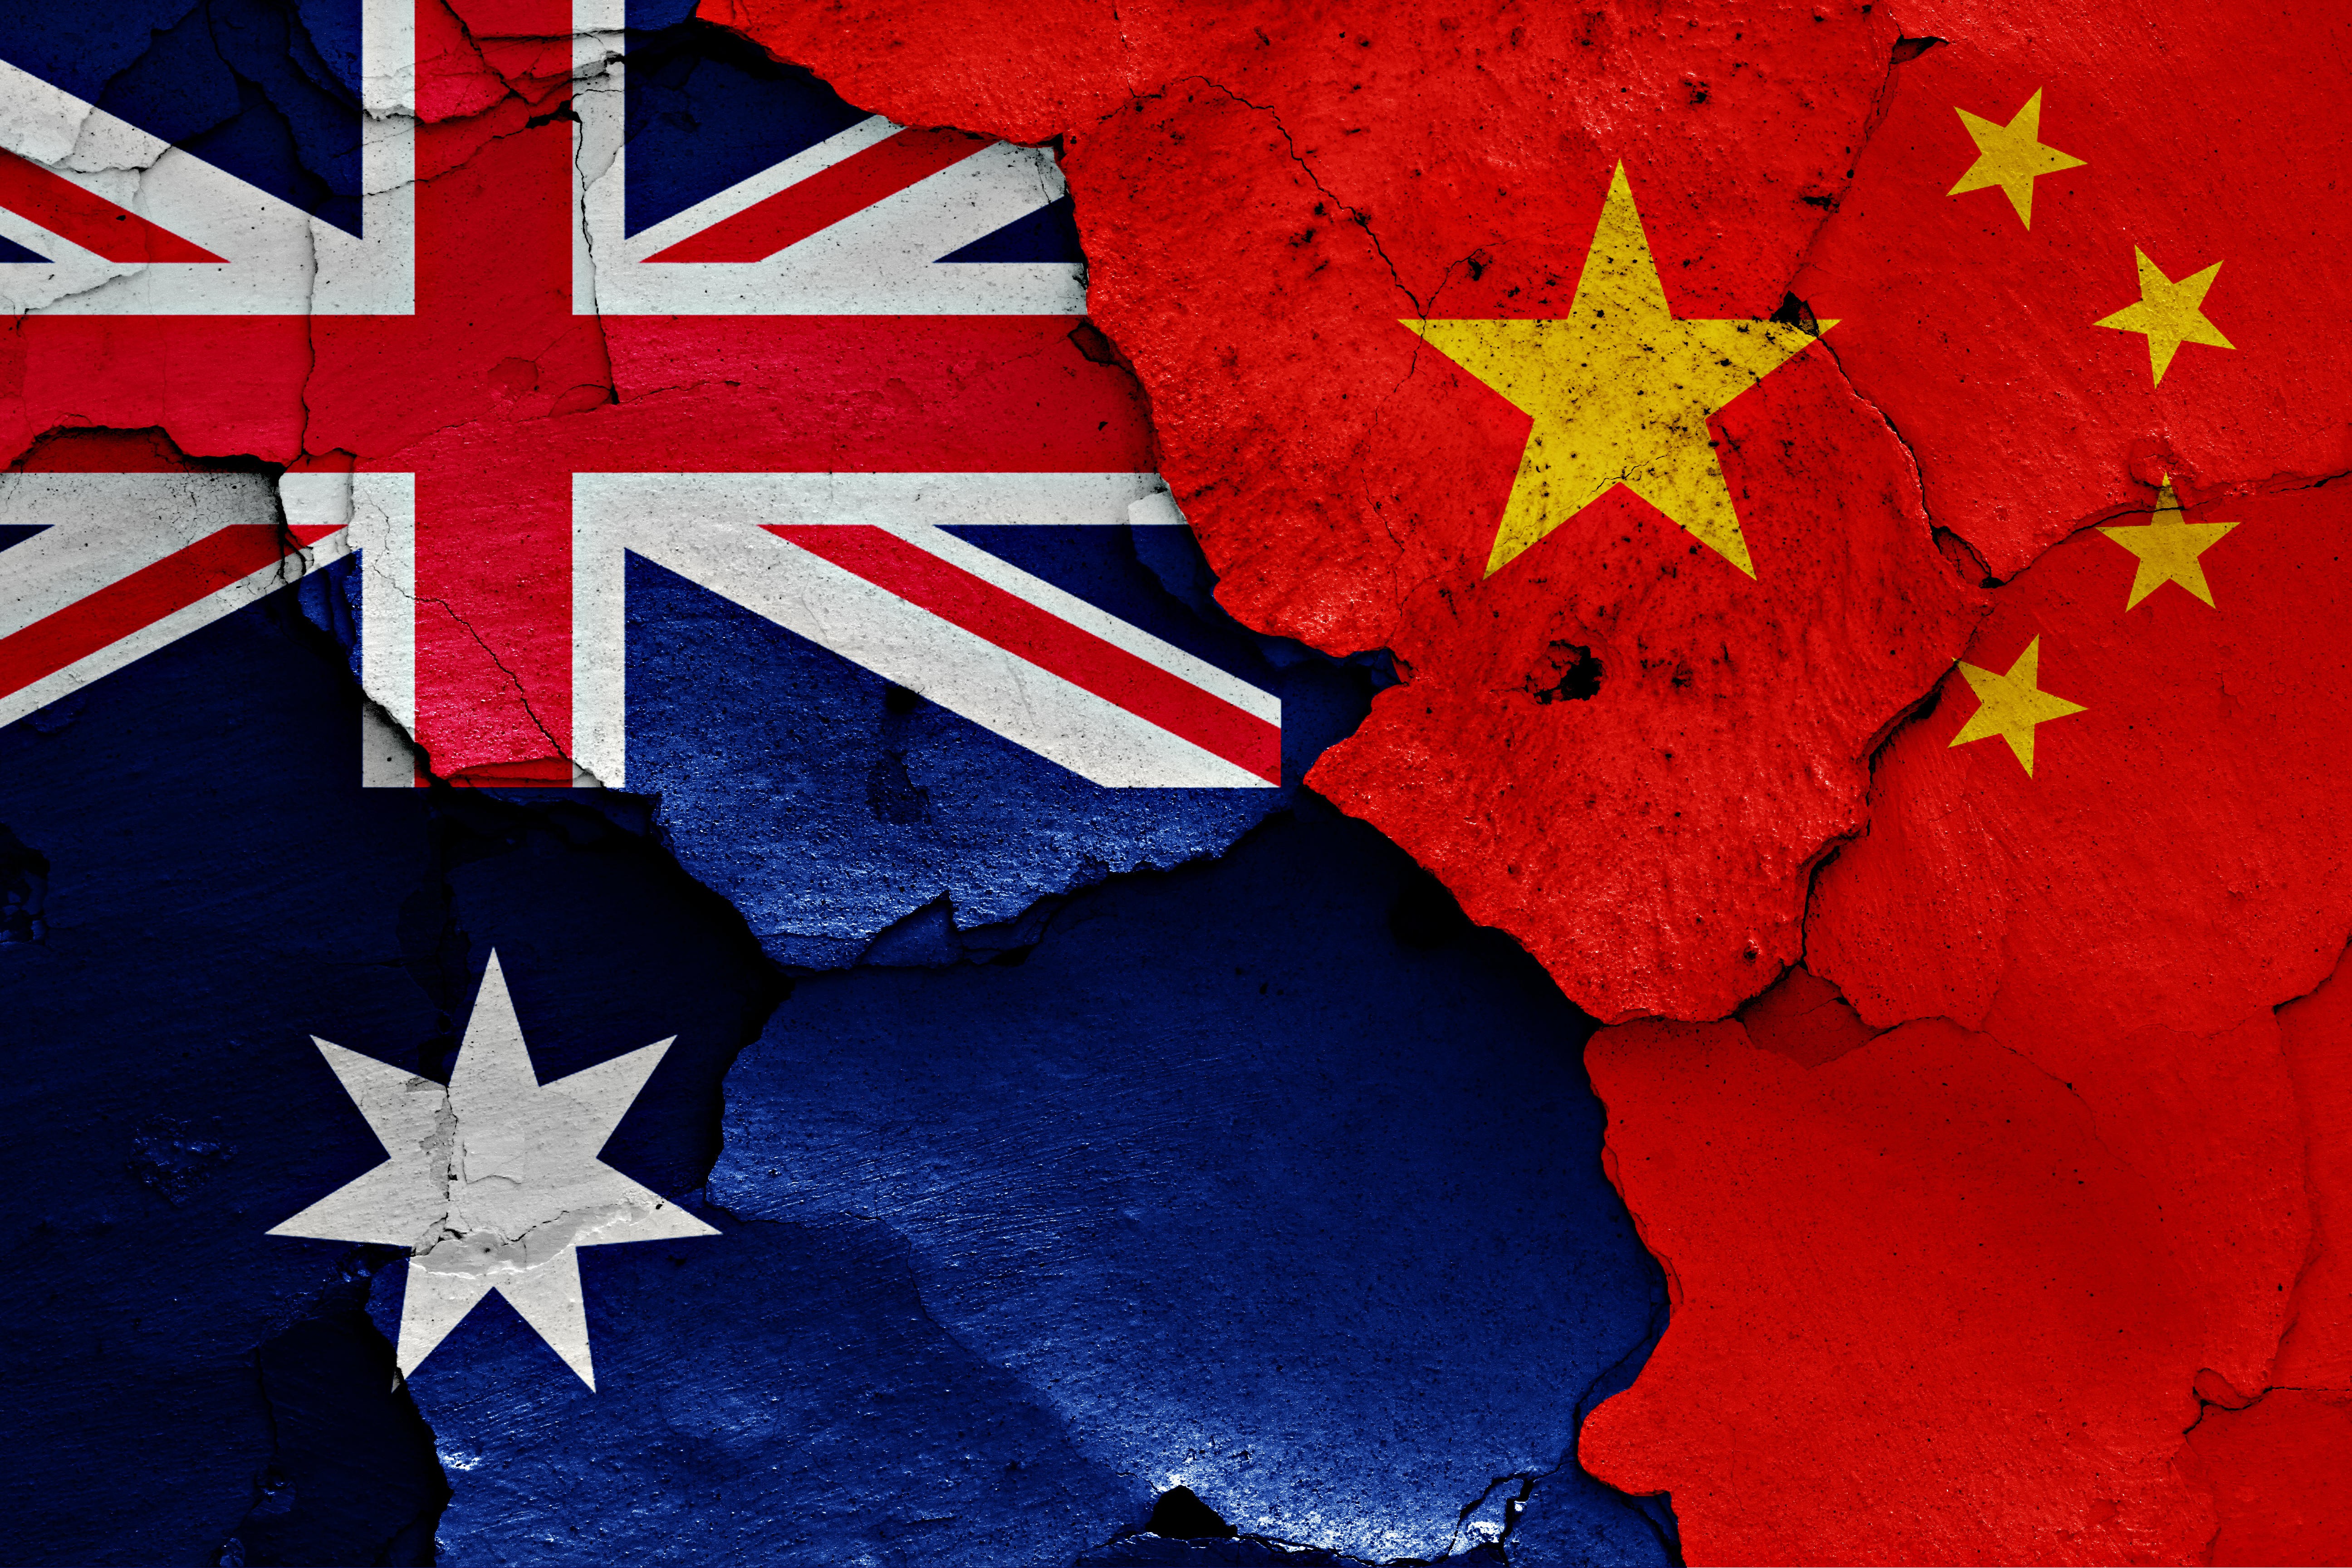 A new form of Sinophobia or anti-Chinese sentiment is emerging in Australia, according to Jieh-Yung Lo. Photo: Alamy